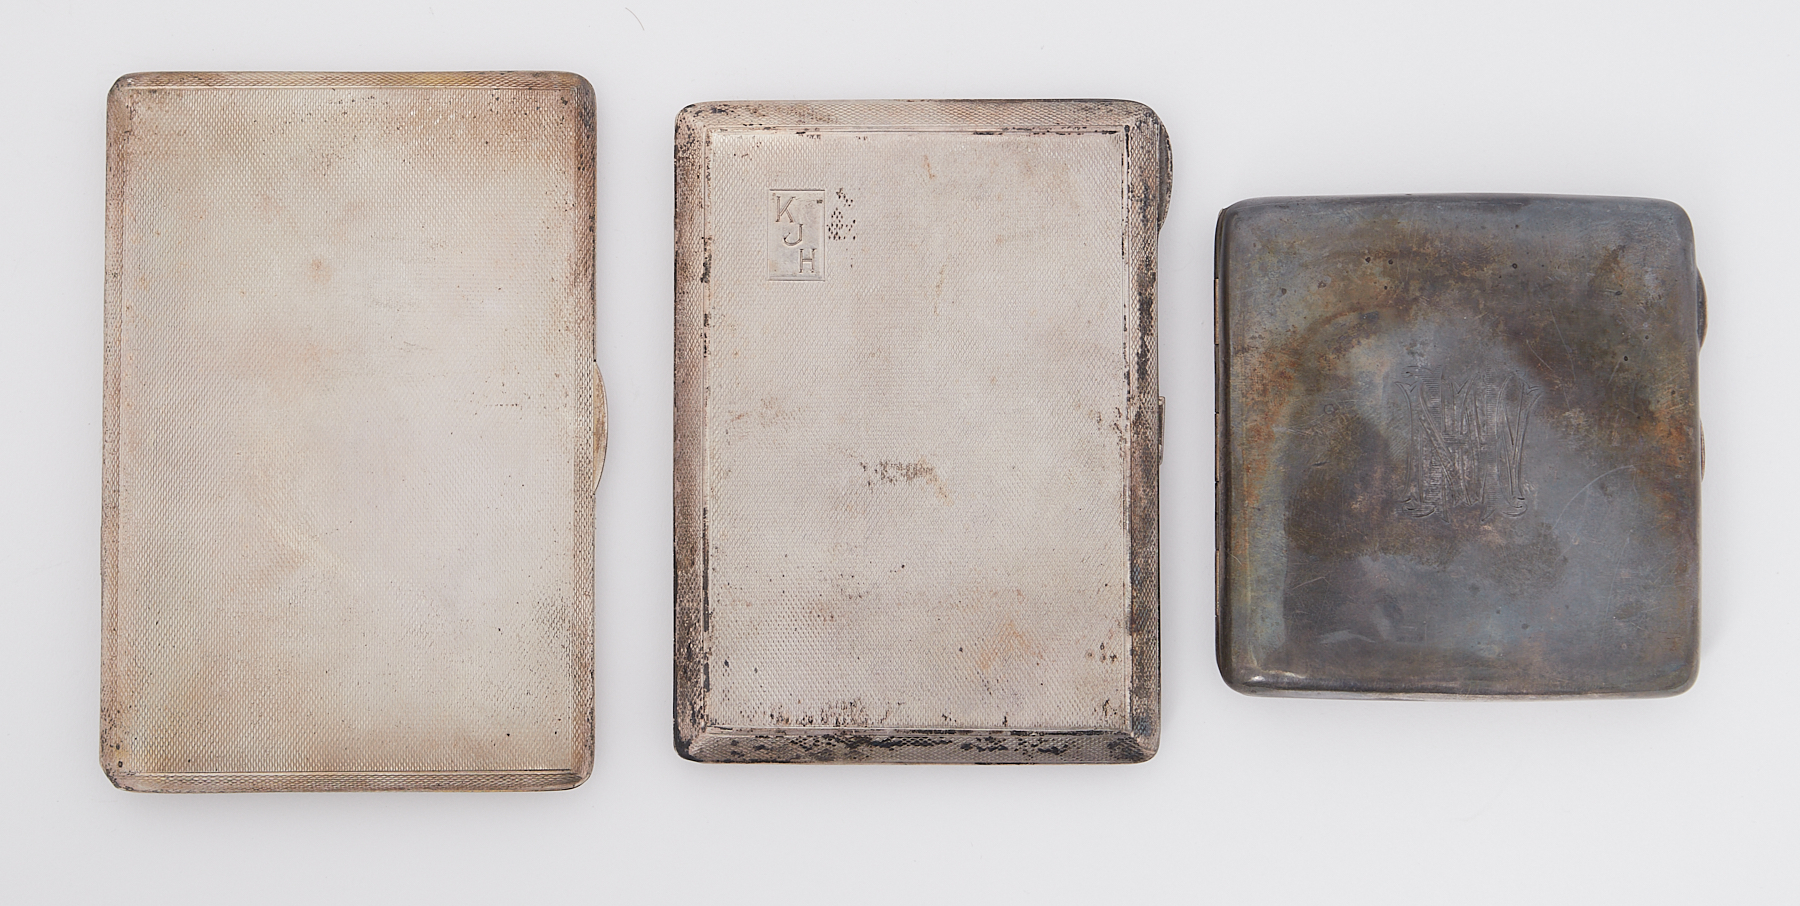 Three silver cigarette cases of varying sizes and designs, total weight 14.51oz.